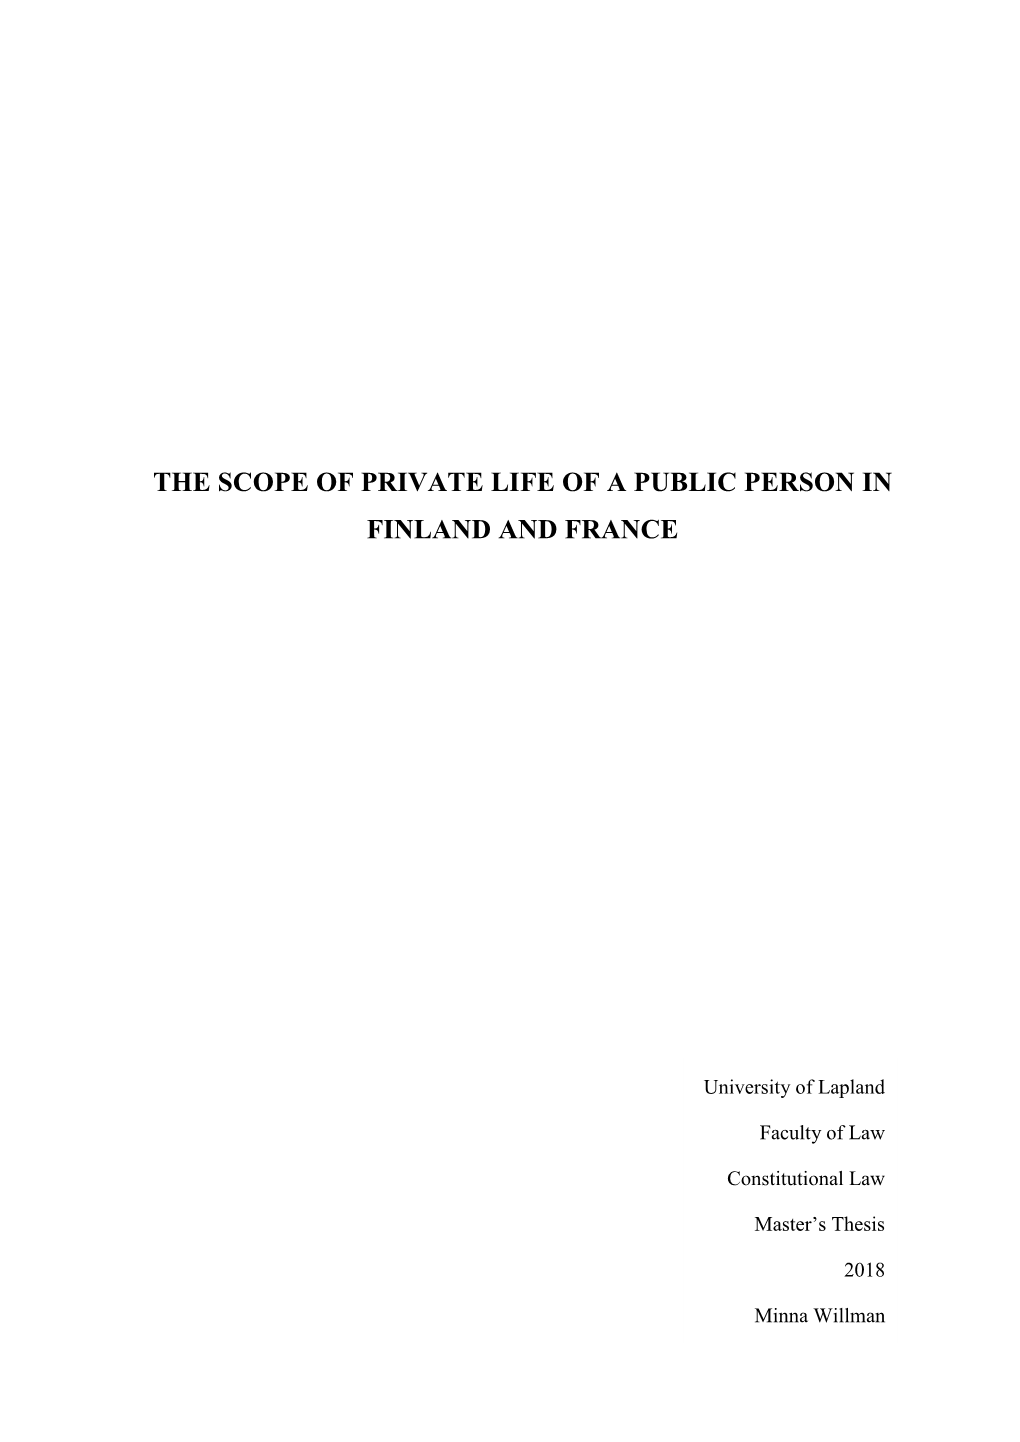 The Scope of Private Life of a Public Person in Finland and France